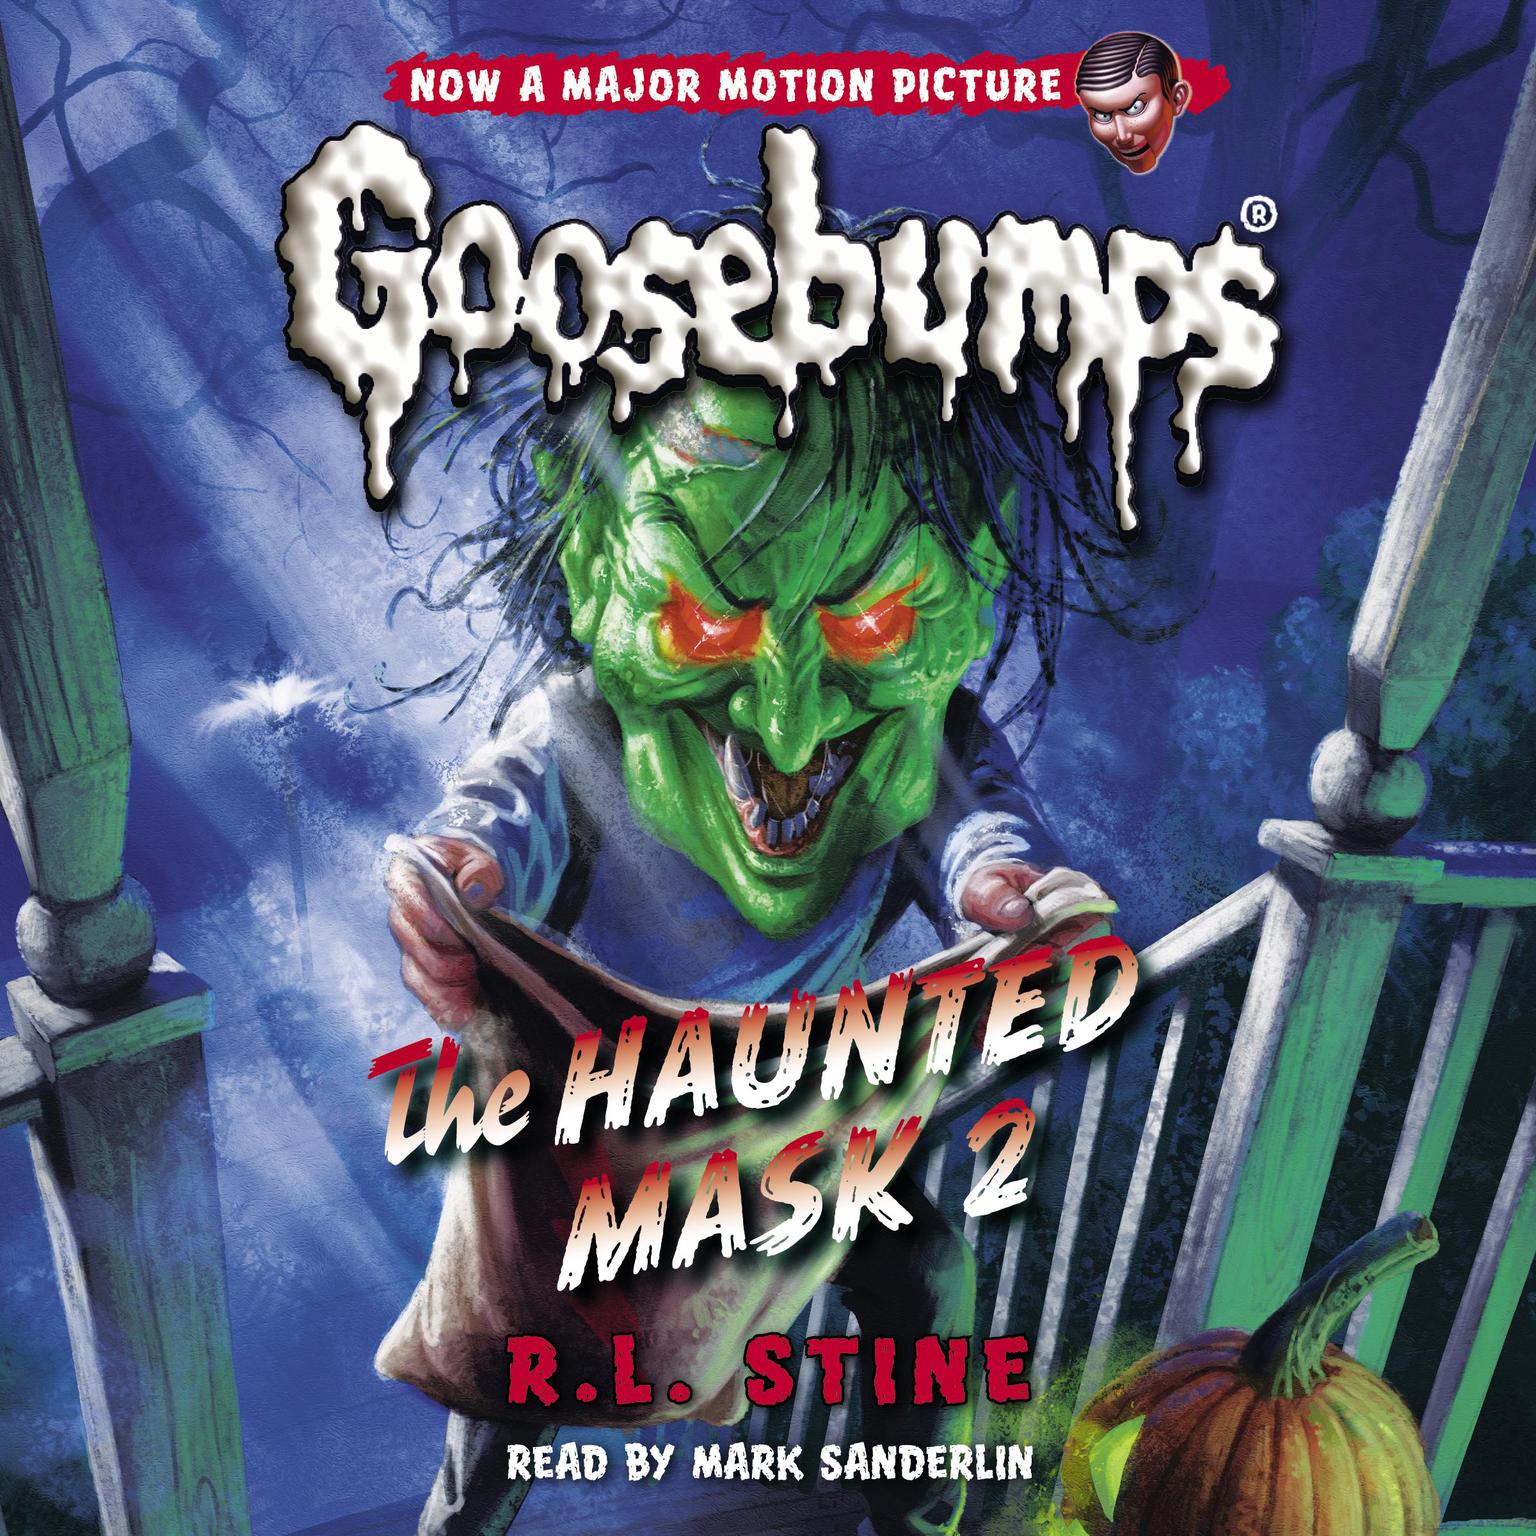 The Haunted Mask II (Classic Goosebumps #34) Audiobook, by R. L. Stine